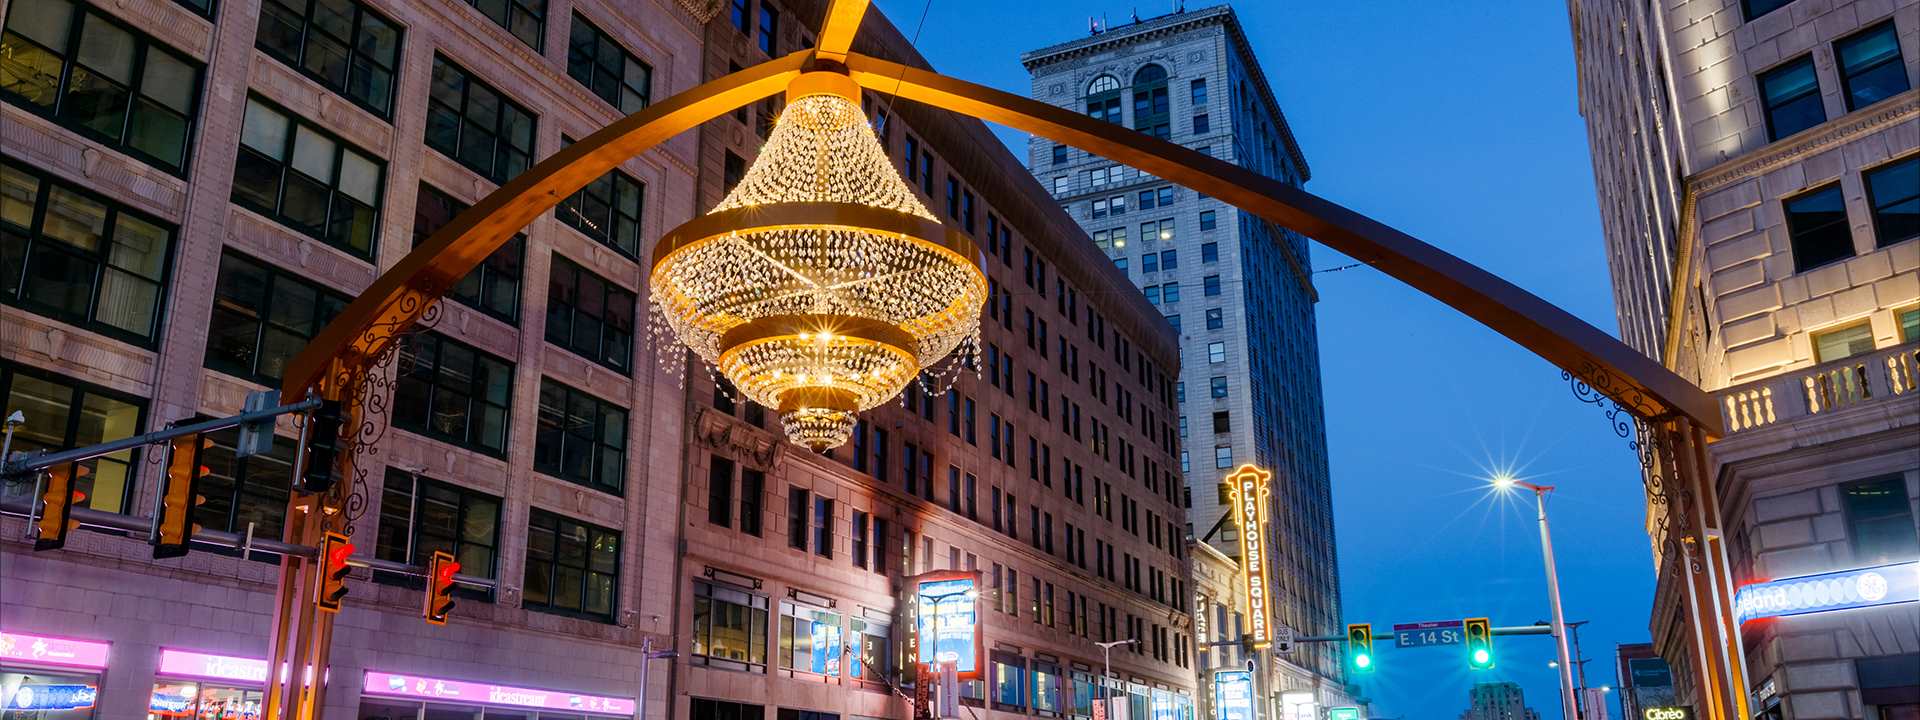 playhouse square theaters